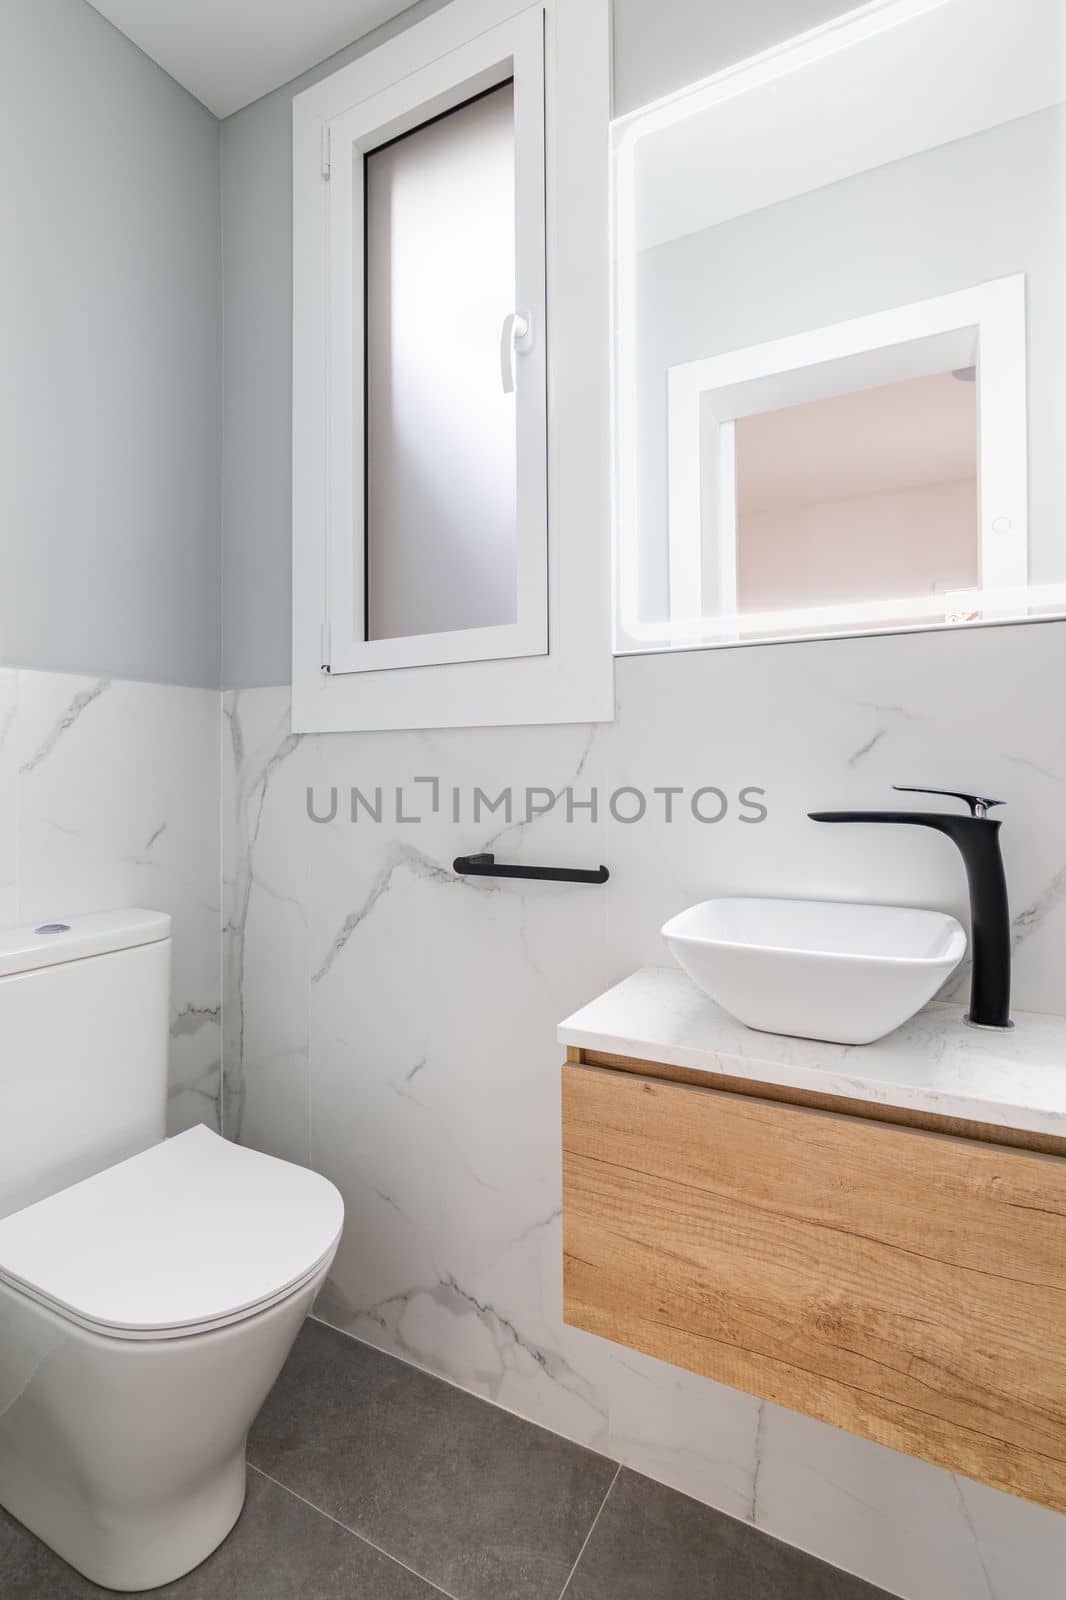 Small bathroom with toilet and designer sink on small vanity with black faucet. Walls of room are made of white natural marble tiles. Square mirror is illuminated with fluorescent light